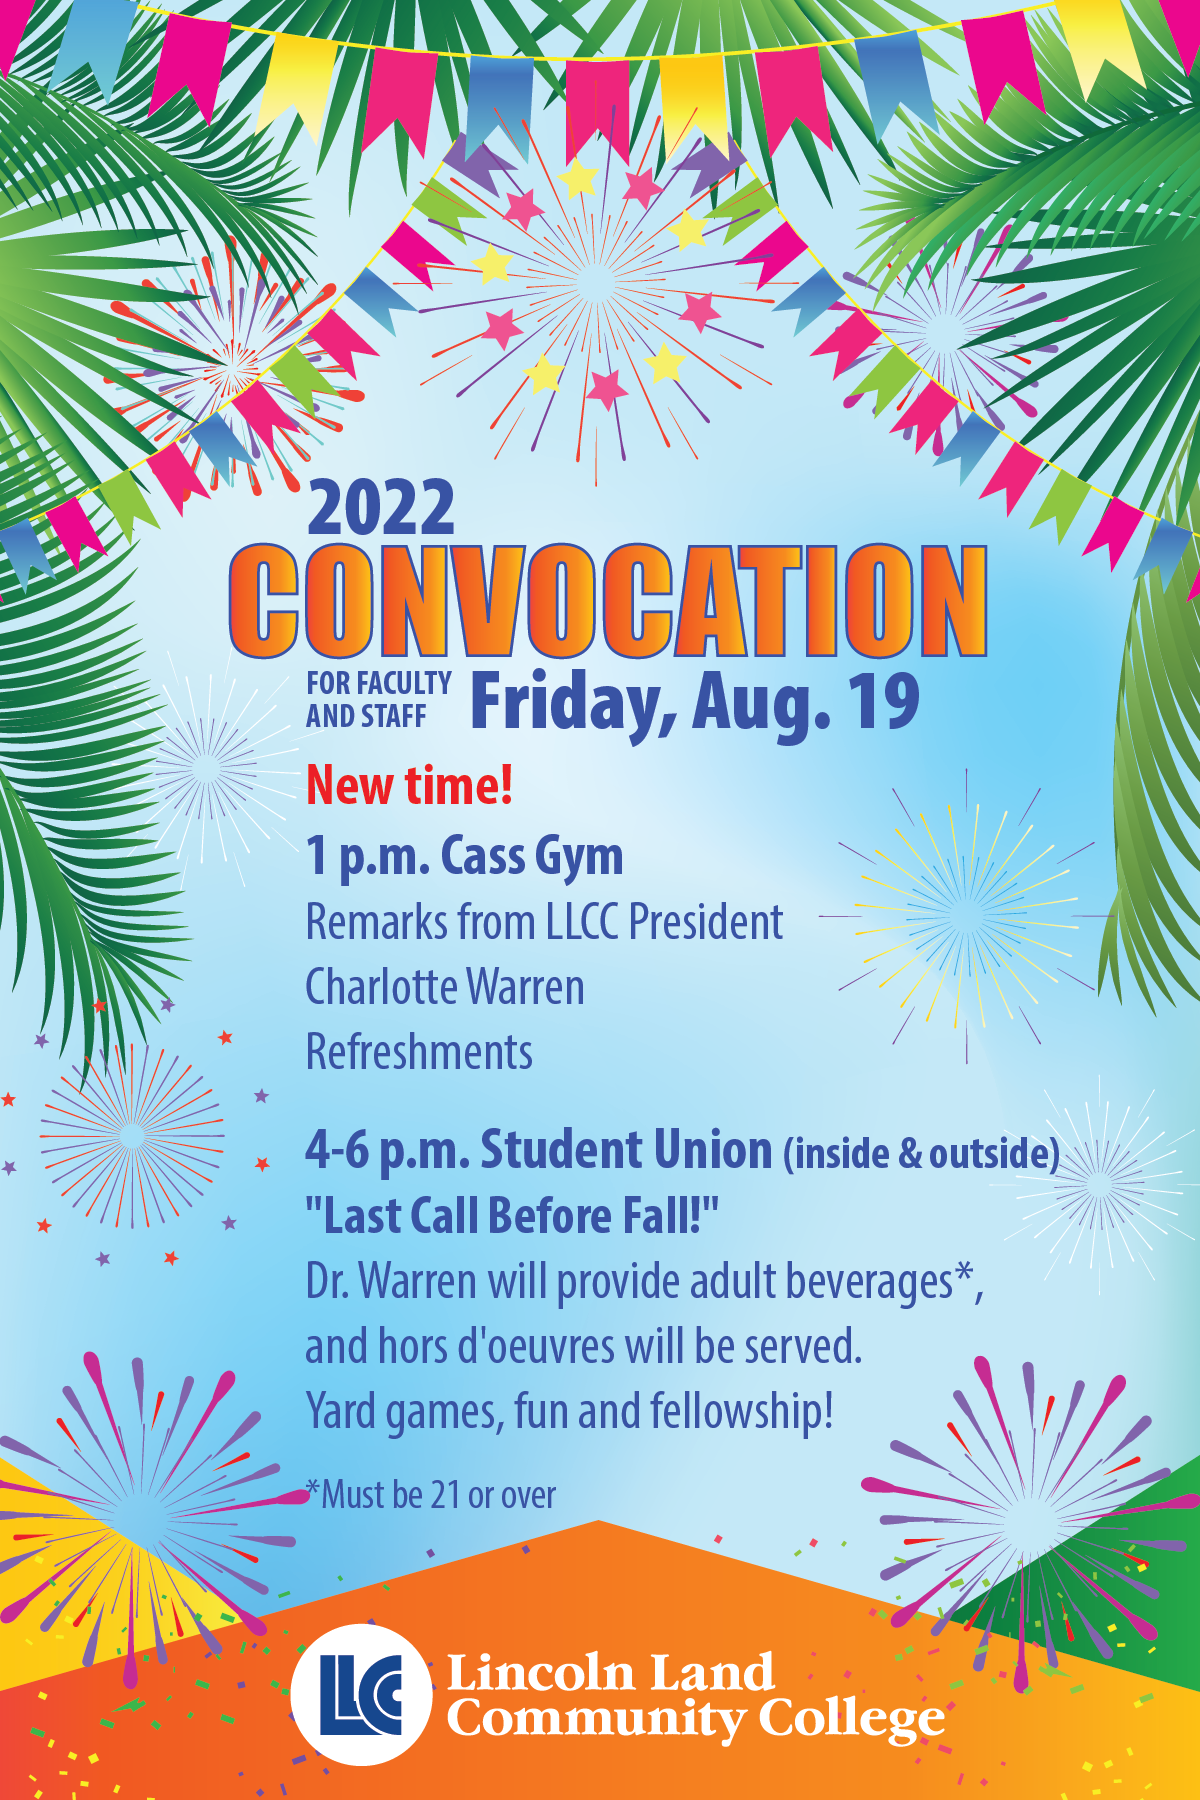 2022 Convocation for faculty and staff. Friday, Aug. 19. New time! 1 p.m. Cass Gym. Remarks from LLCC President Charlotte Warren. Refreshments. 4-6 p.m. Student Union (inside & outside). "Last Call Before Fall!" Dr. Warren will provide adult beverages*, and hors d'oeuvres will be served. Yard games, fun and fellowship! *Must be 21 or over.